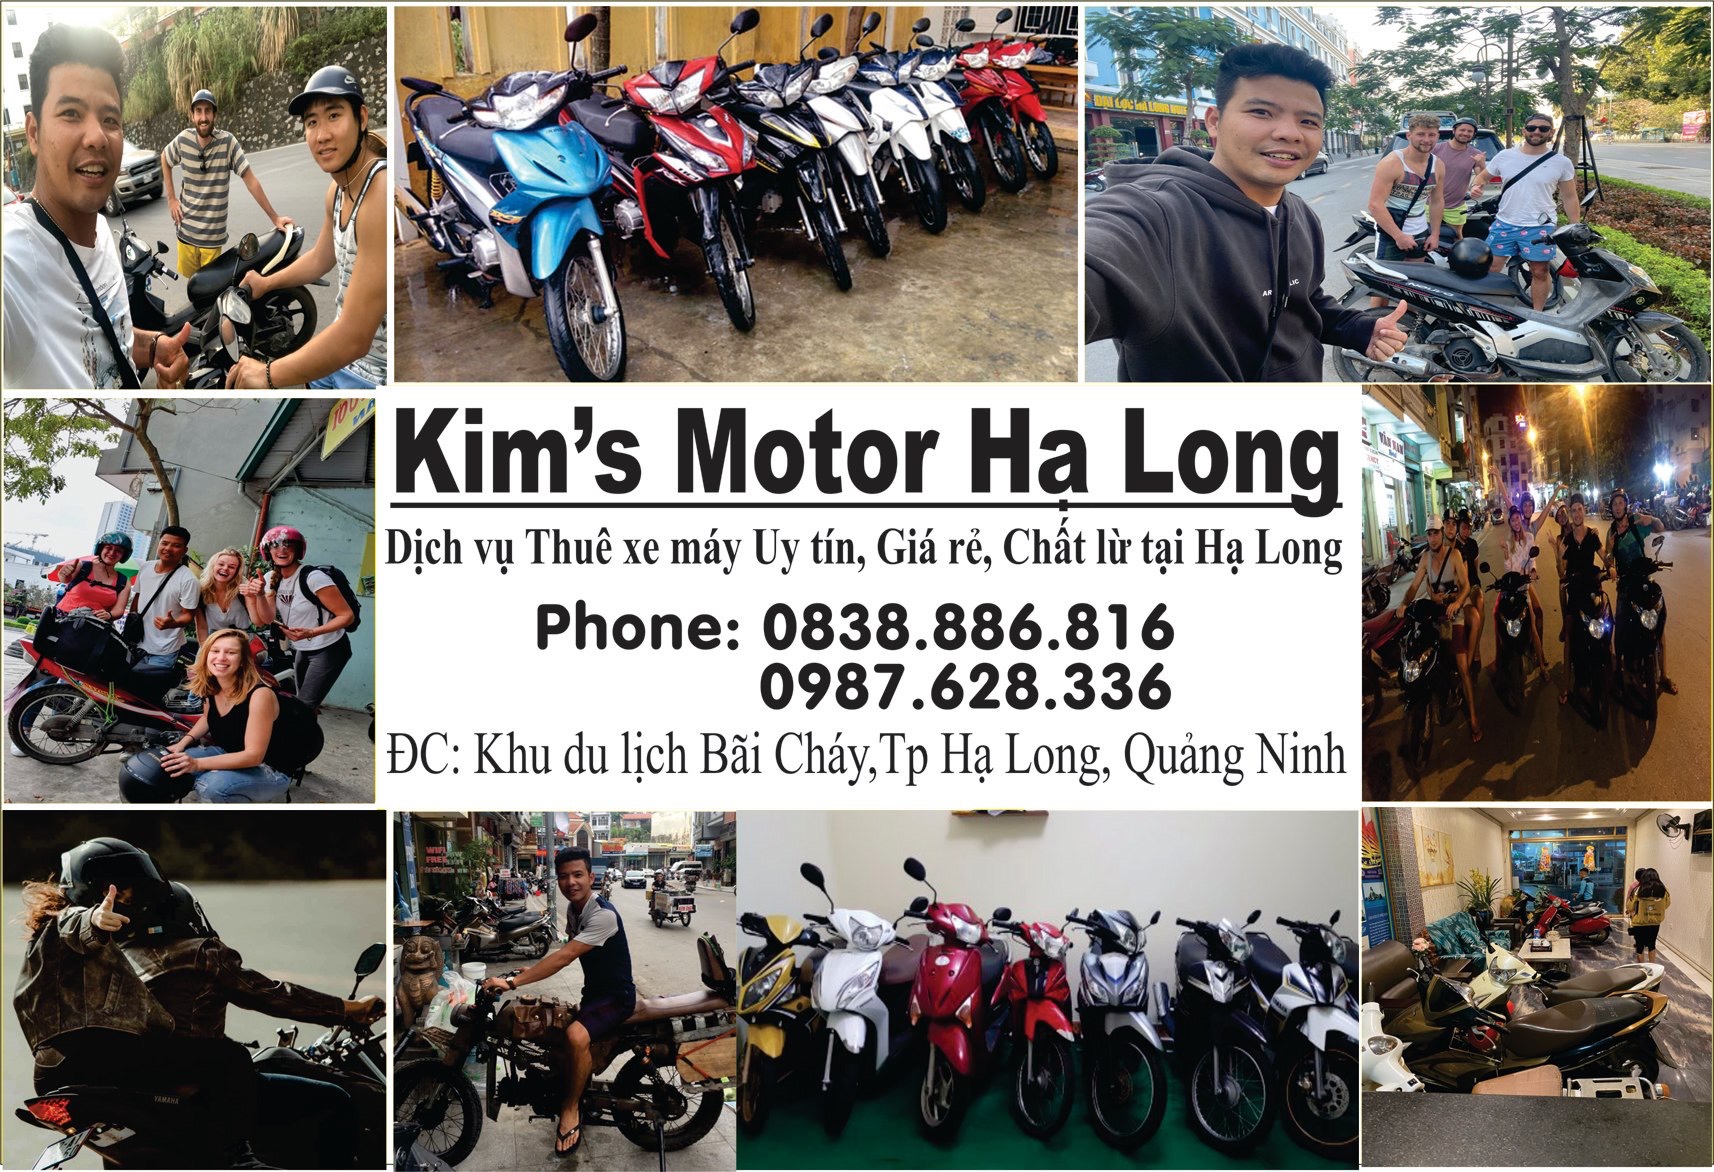 This figure is higher than that of Hanoi and Da Nang. The following article will give you some useful Halong Bay travel and Ha Long motorbike rental’s experiences.